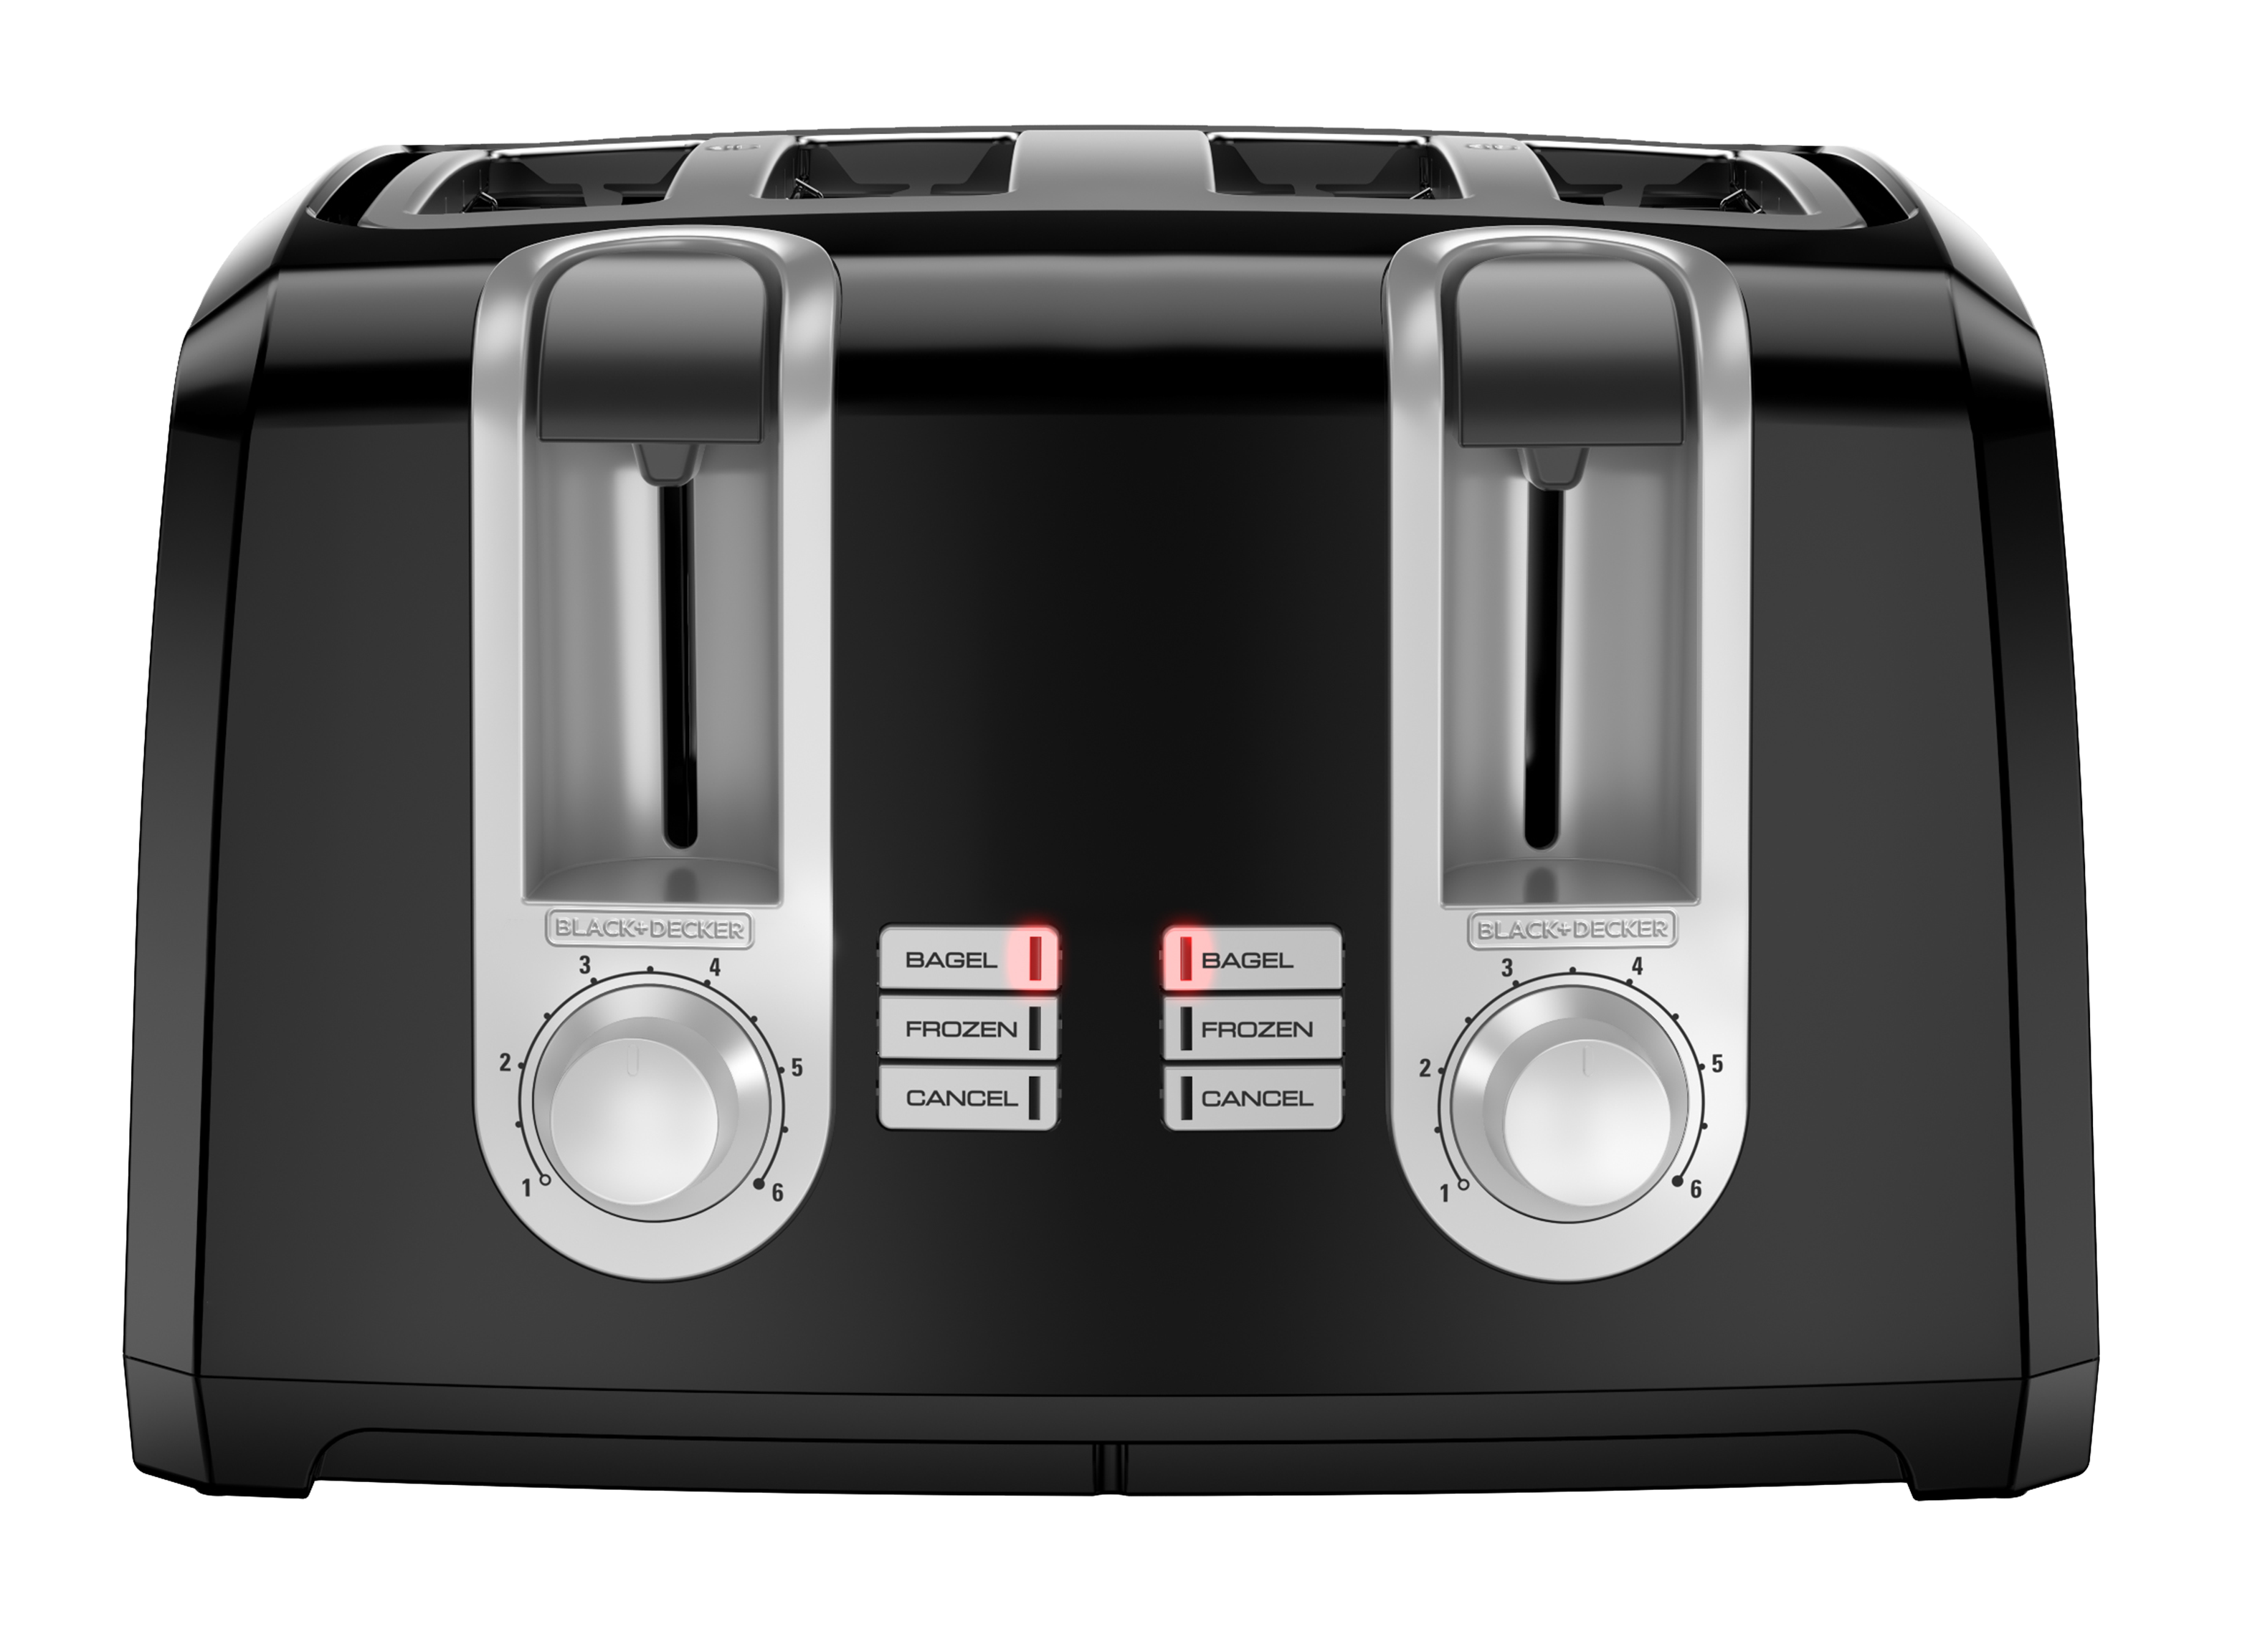 Black+Decker T4569B 4-Slice Toaster & Toaster Oven Review - Consumer Reports